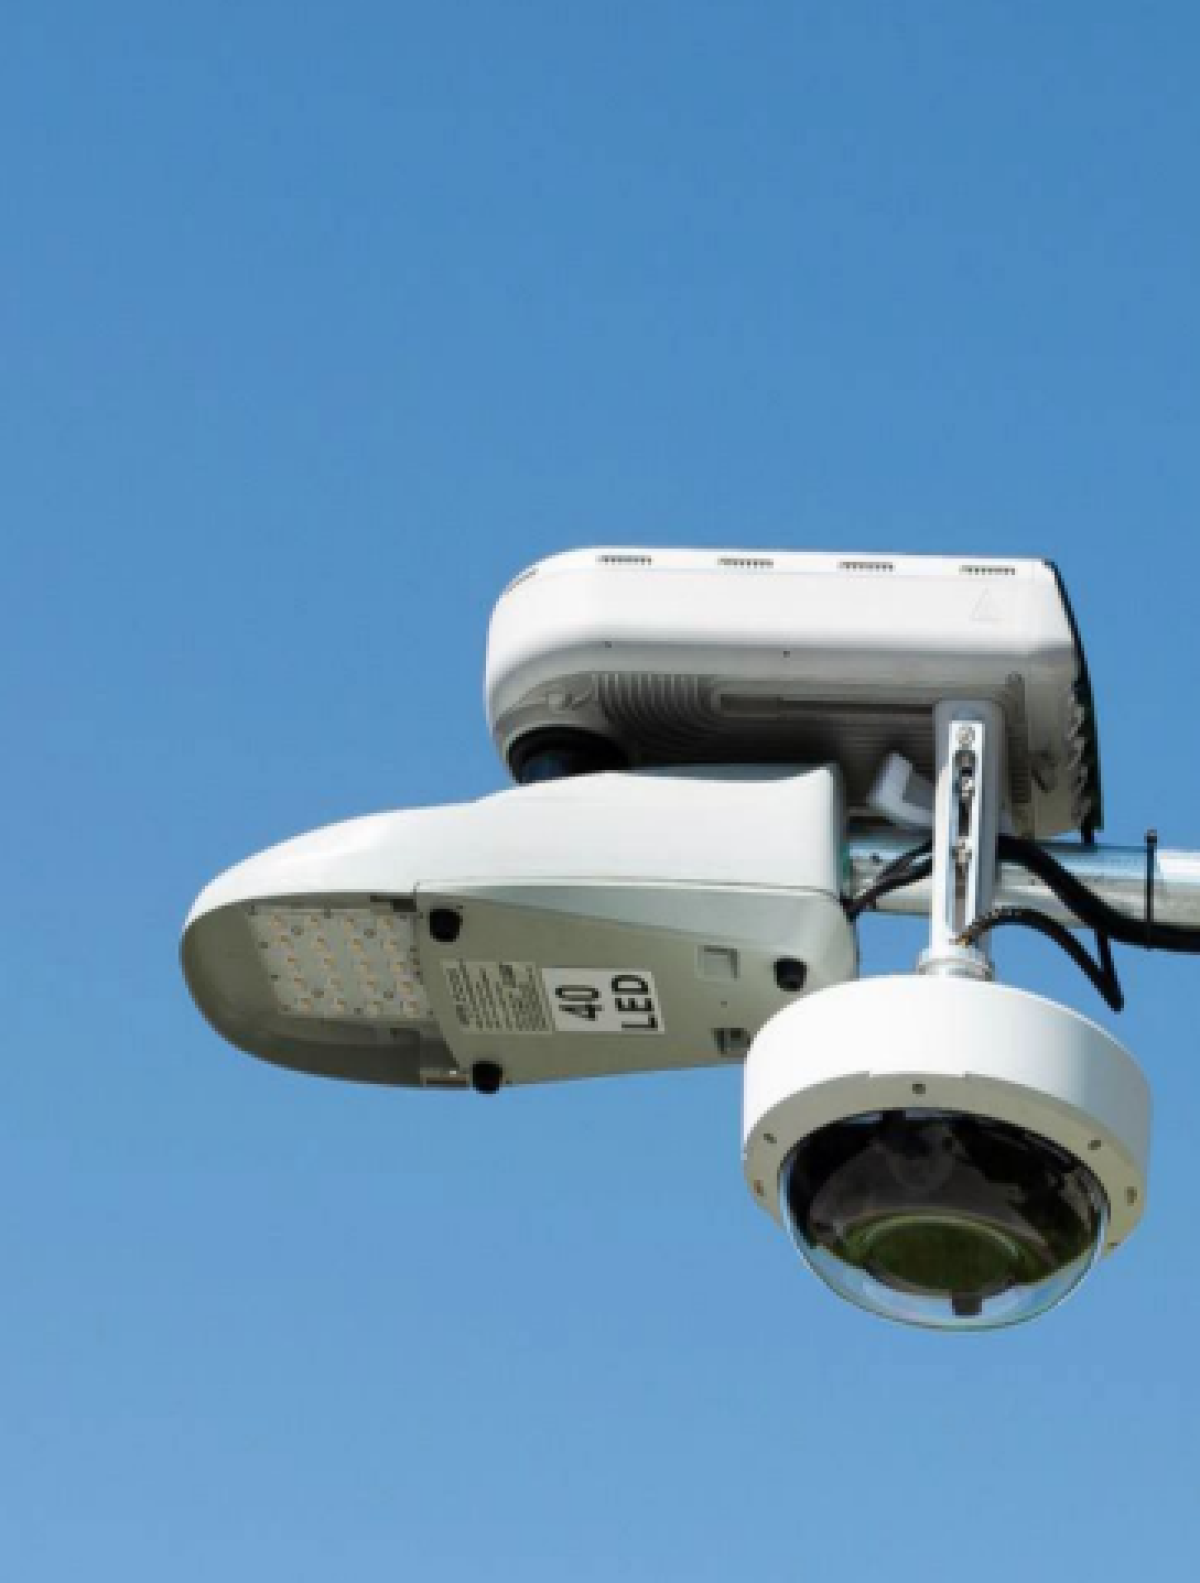 An example of surveillance technology the San Diego Police Department wants on 500 streetlights around the city.